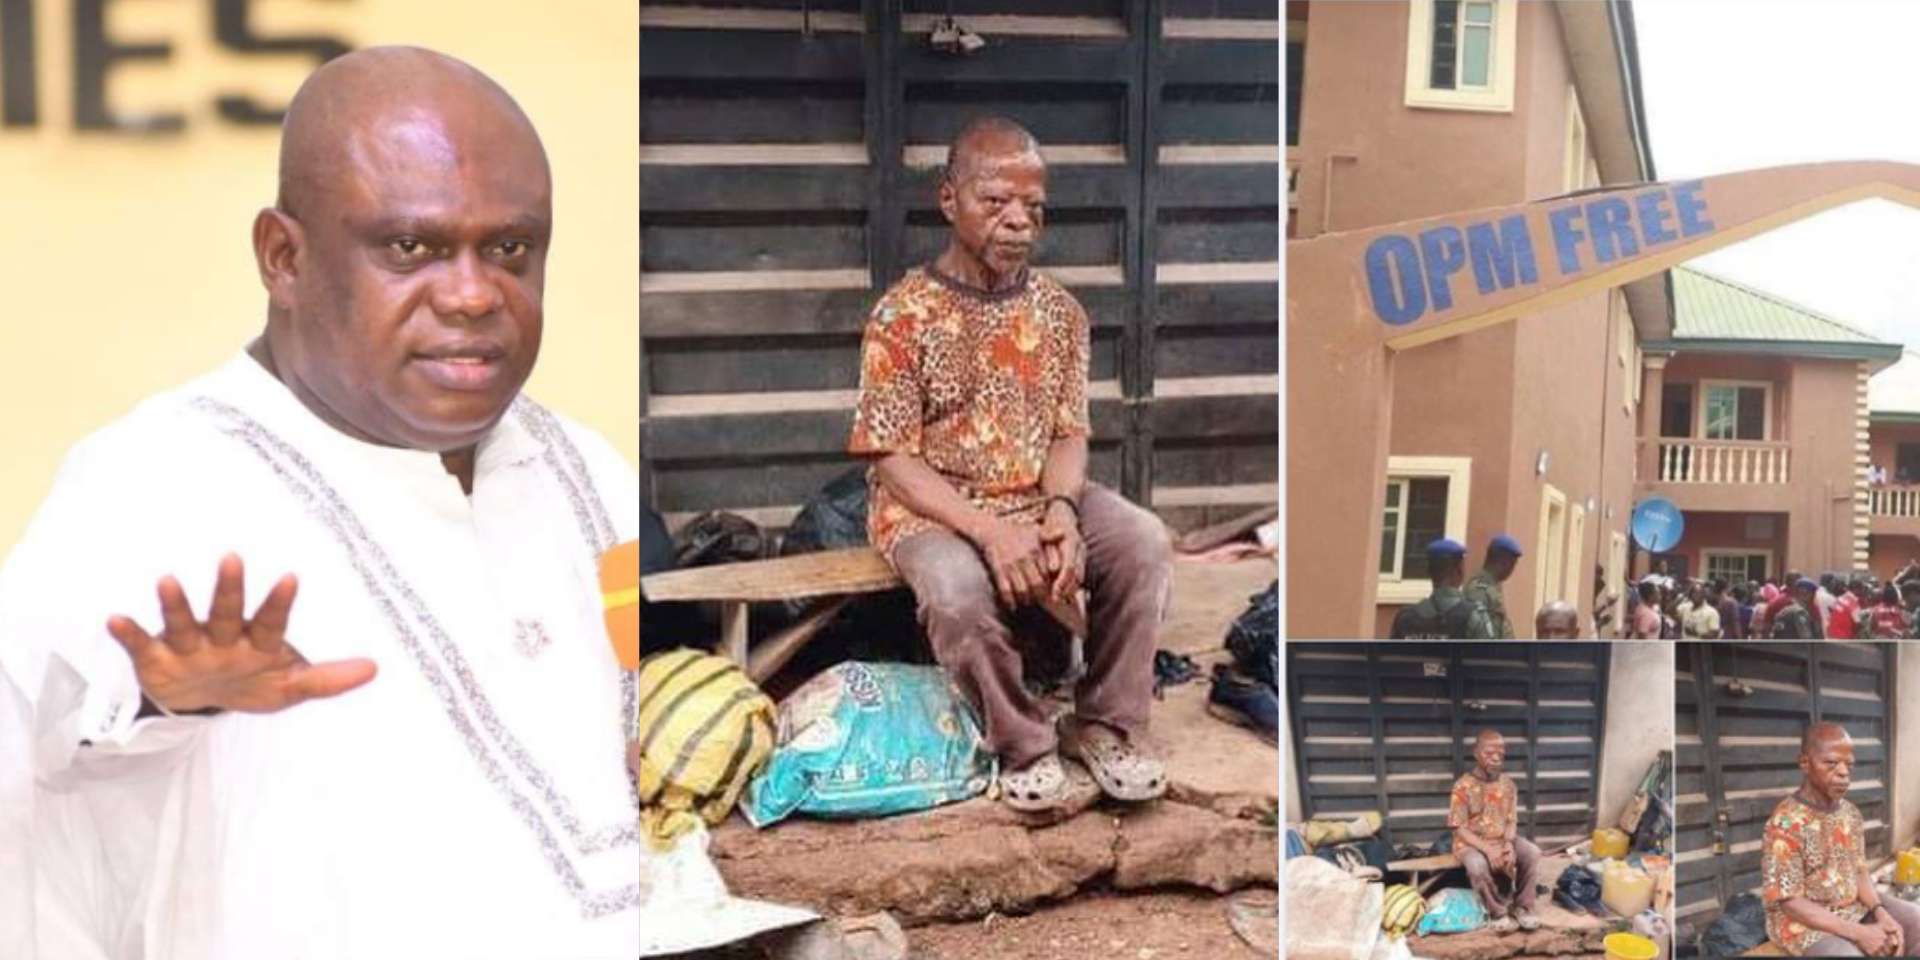 Apostle Chibuzor reacts to Kenneth Aguba's condition; offers him free accommodation, feeding